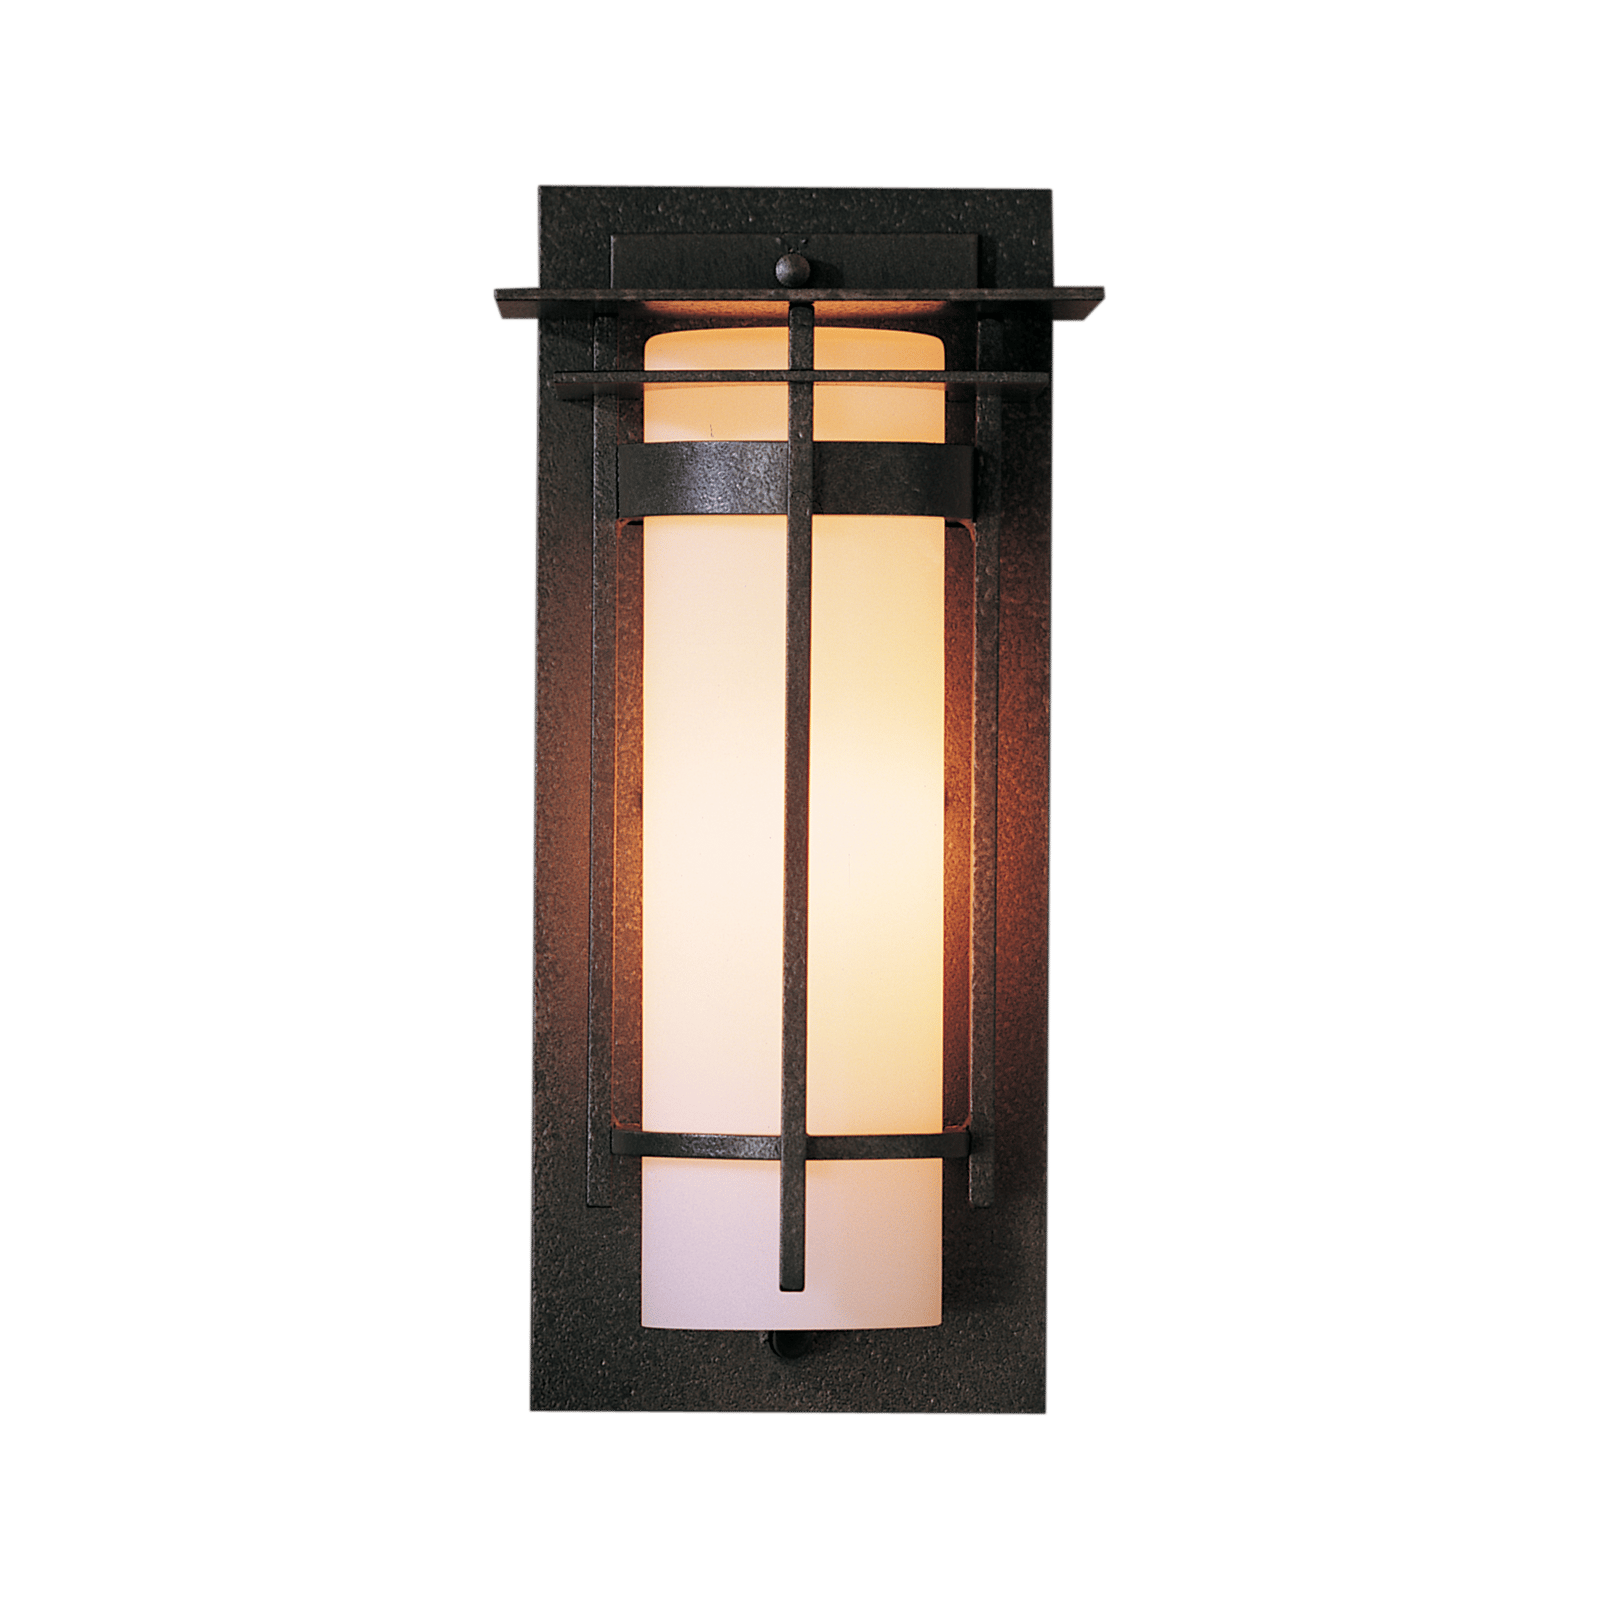 Hubbardton Forge Banded with Top Plate Small Outdoor Sconce Outdoor l Wall Hubbardton Forge Coastal Natural Iron  